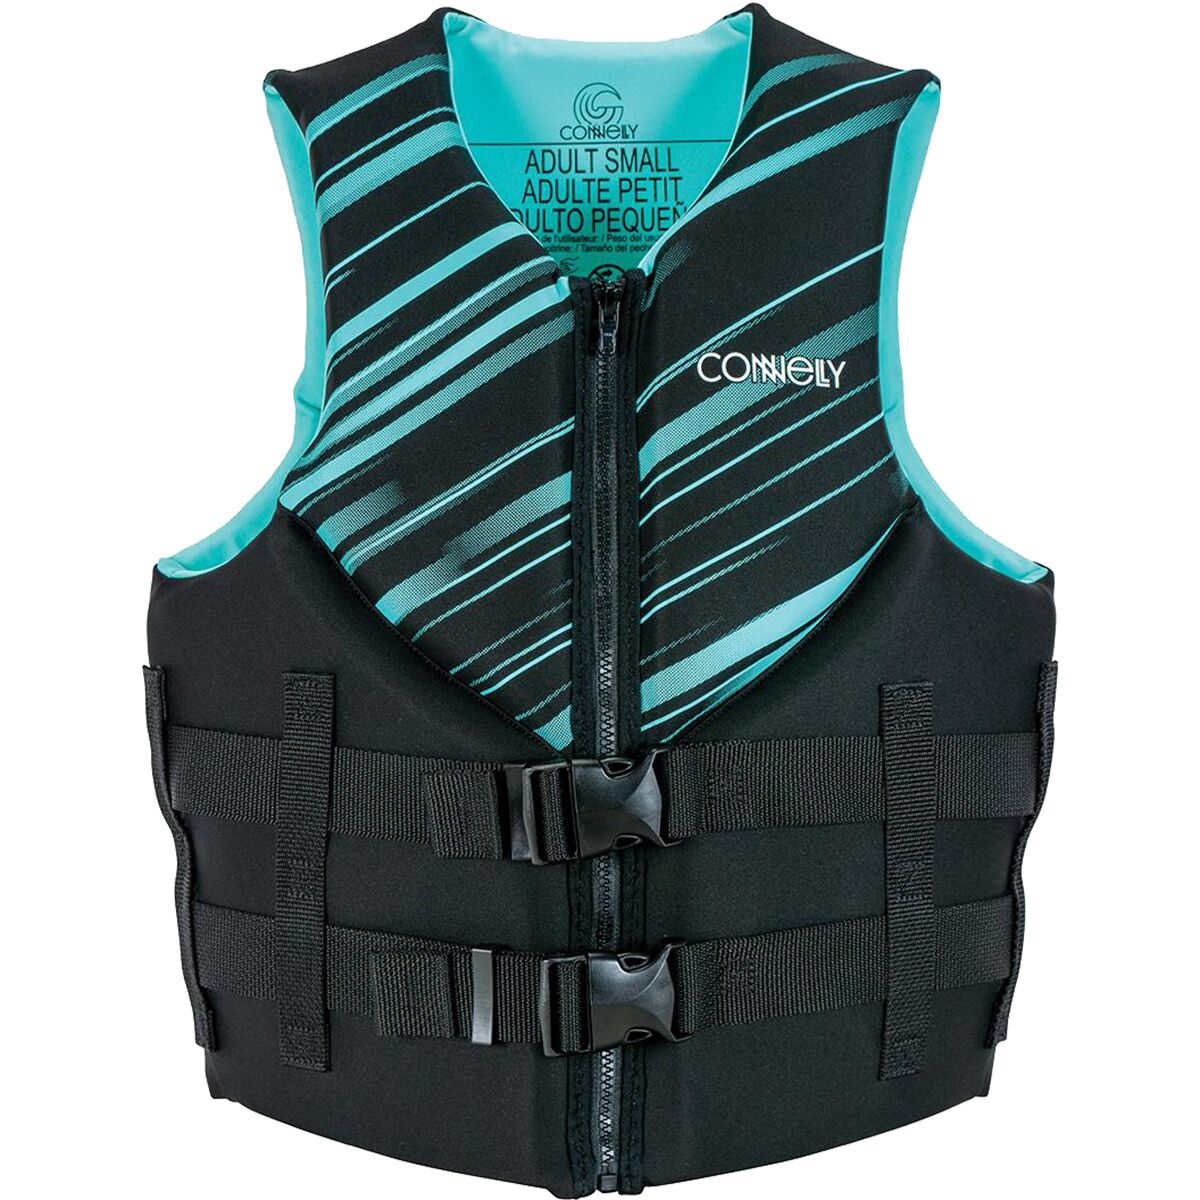 Connelly Skis Connelly SkisPromo Neo Vest - Women's